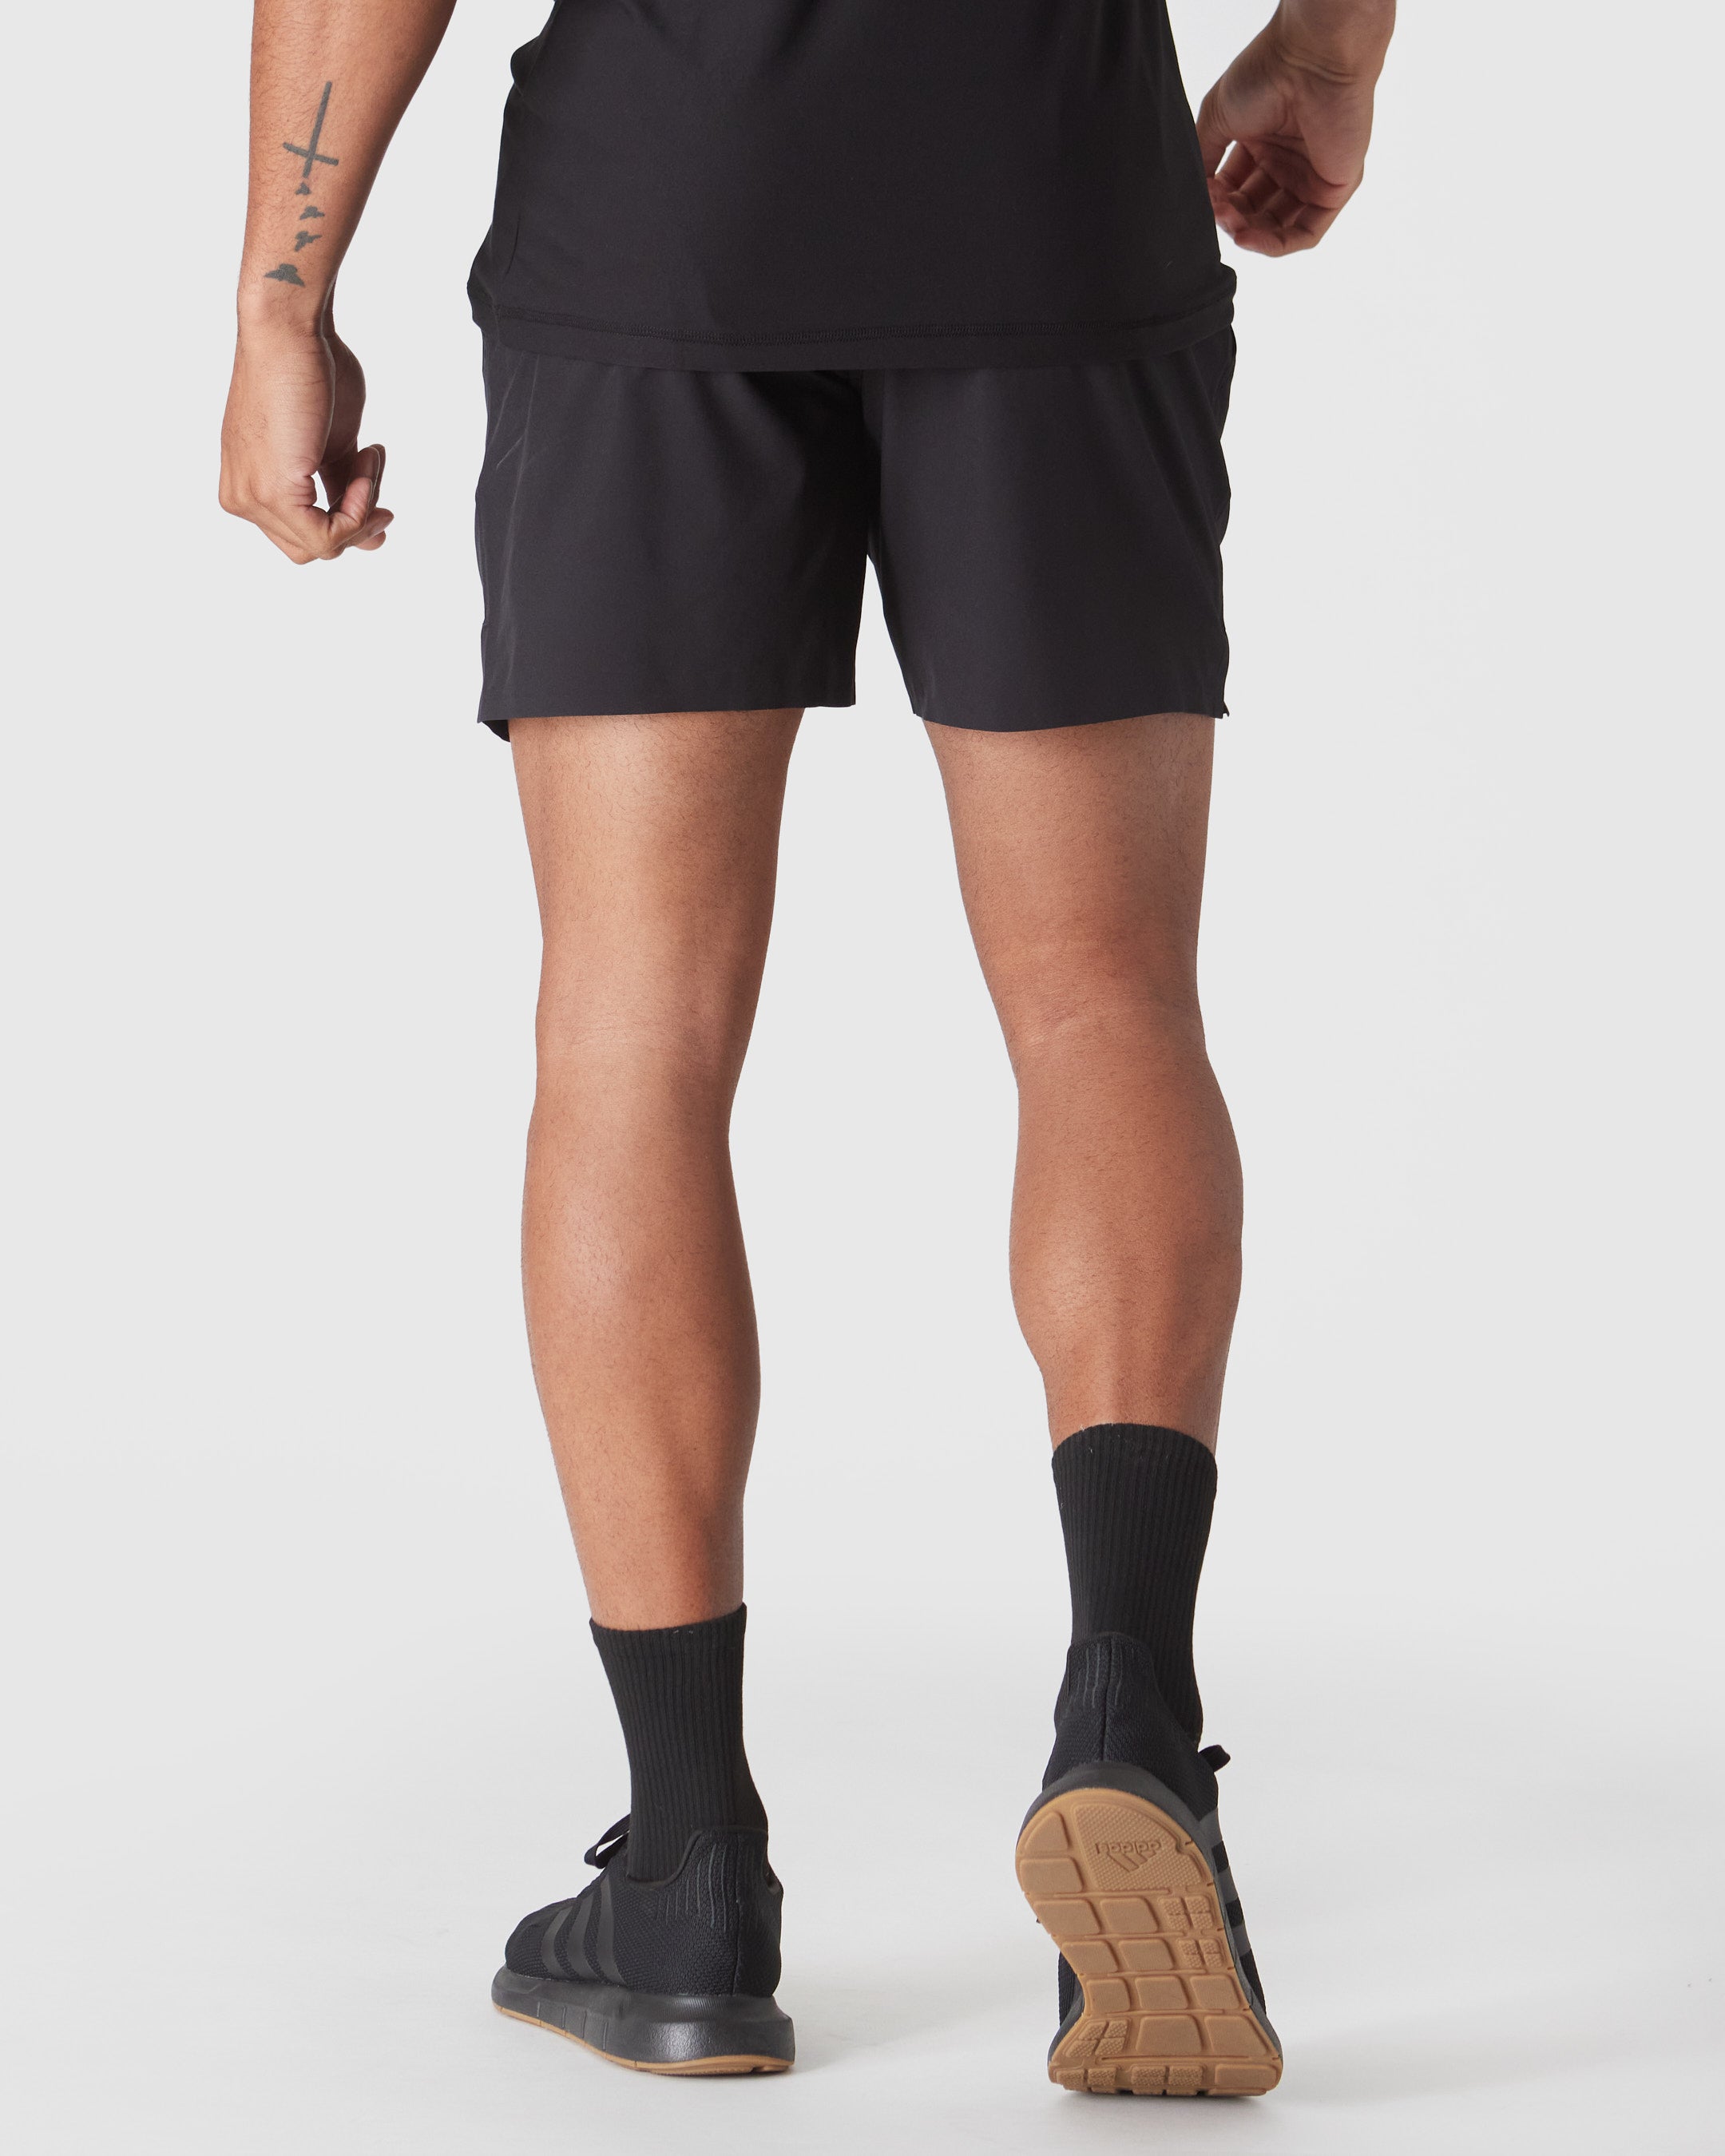 Black & Voyager 7" 2-In-1 Active Training Shorts 2-Pack